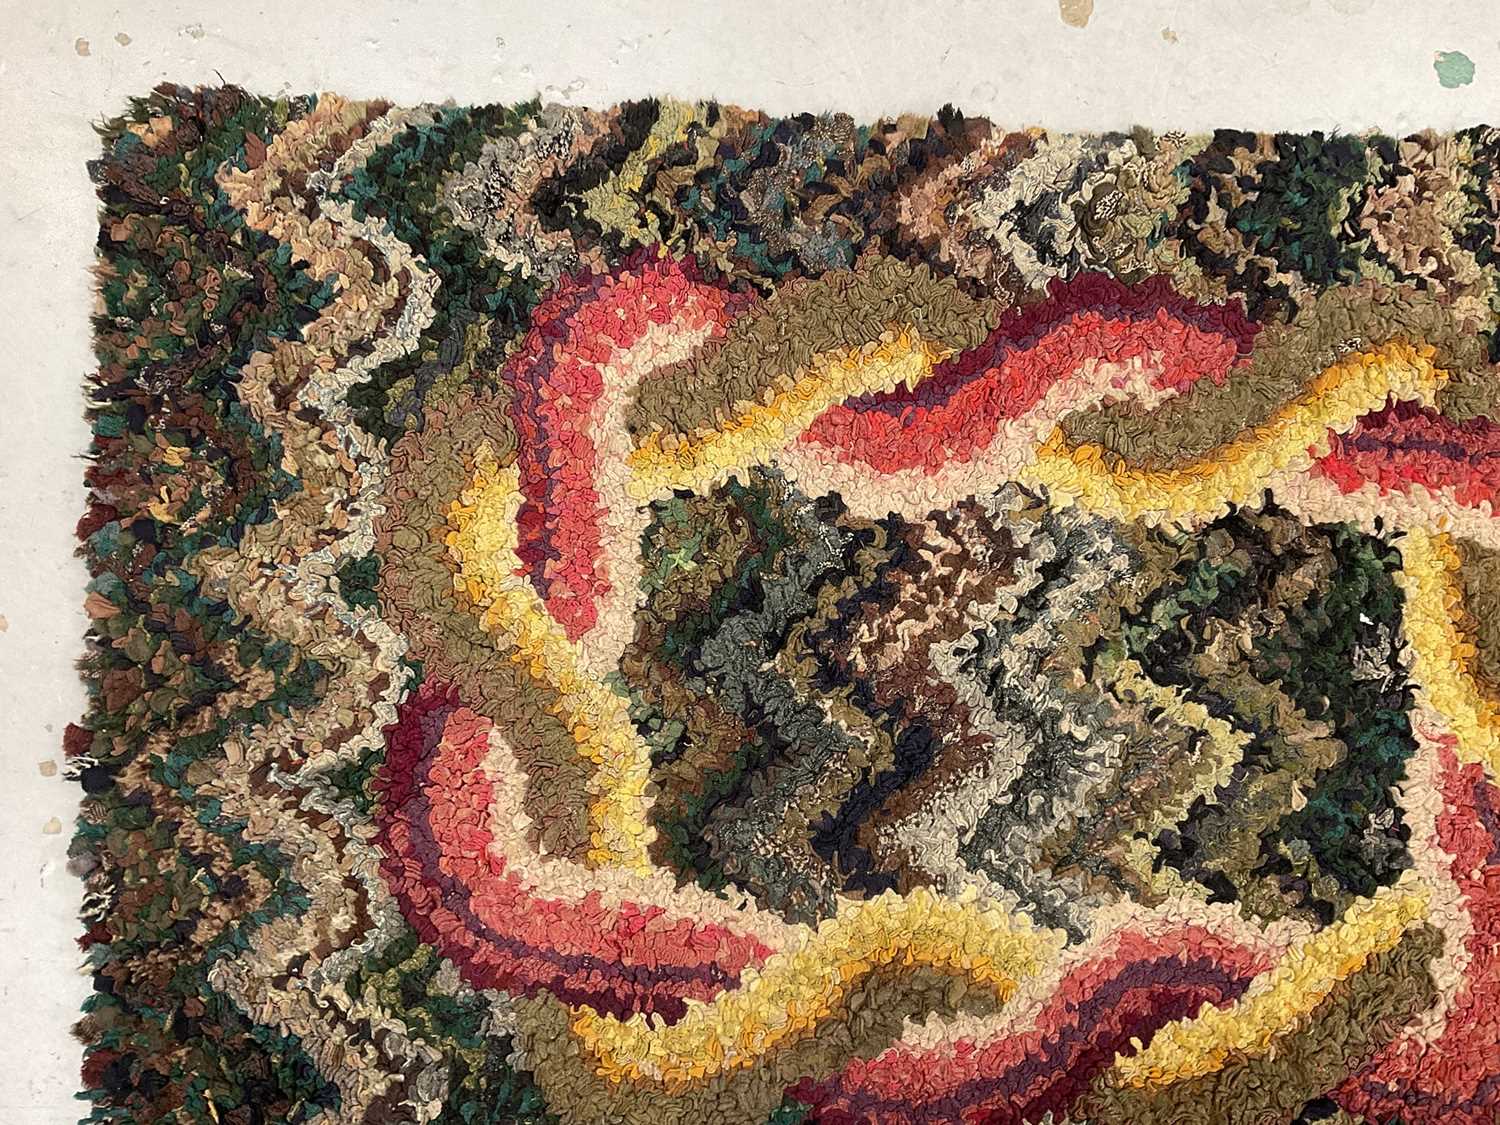 Omega style rag rug with abstract design with flame motif, 102 x 66cm - Image 3 of 5